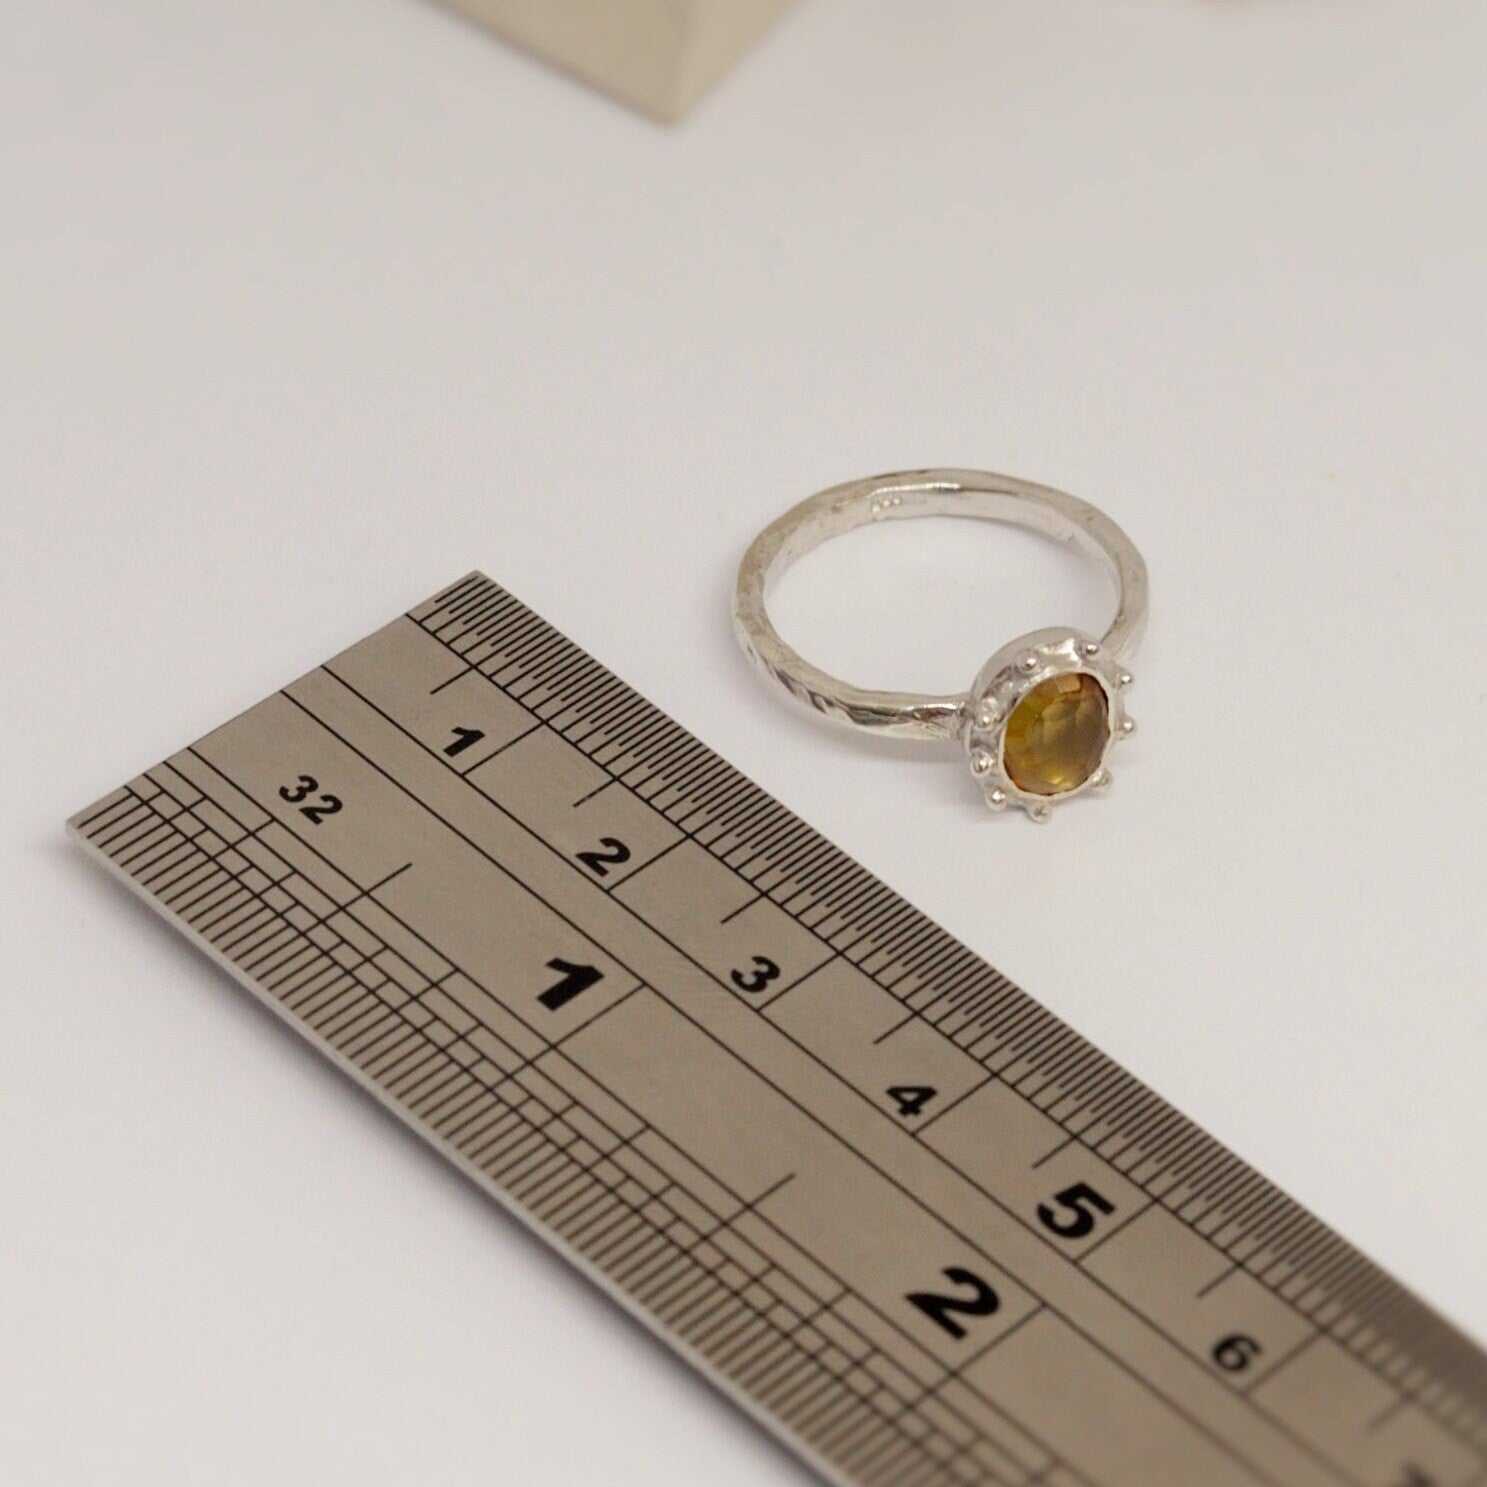 Yellow Tourmaline Ring, Stackable Sterling Silver Rings, October Birthstone, Gifts for her, Birthday Gift, Gemstone Rings for Women